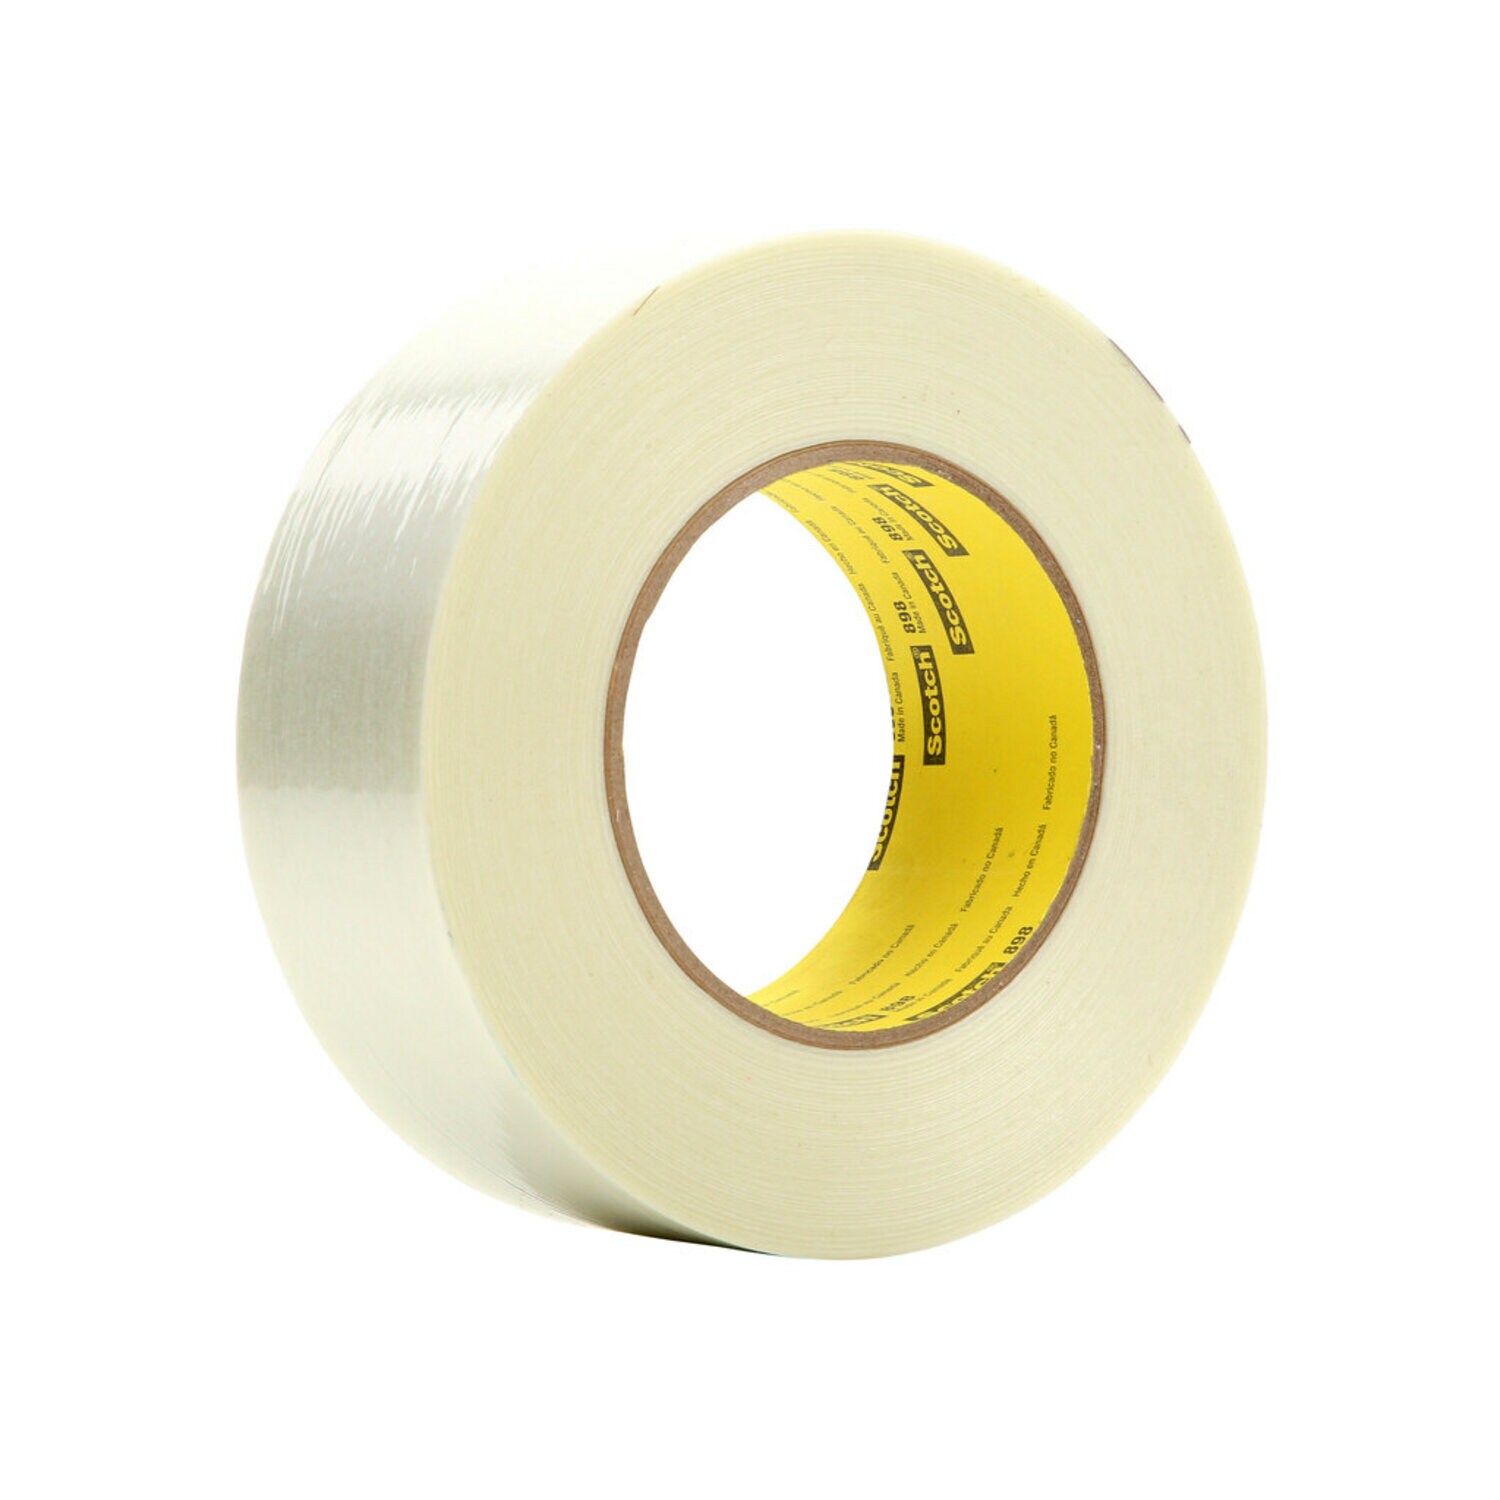 7010300522 - Scotch Filament Tape 898, Clear, 48 mm x 55 m, 6.6 mil, 24 rolls per
case, Individually Wrapped Conveniently Packaged